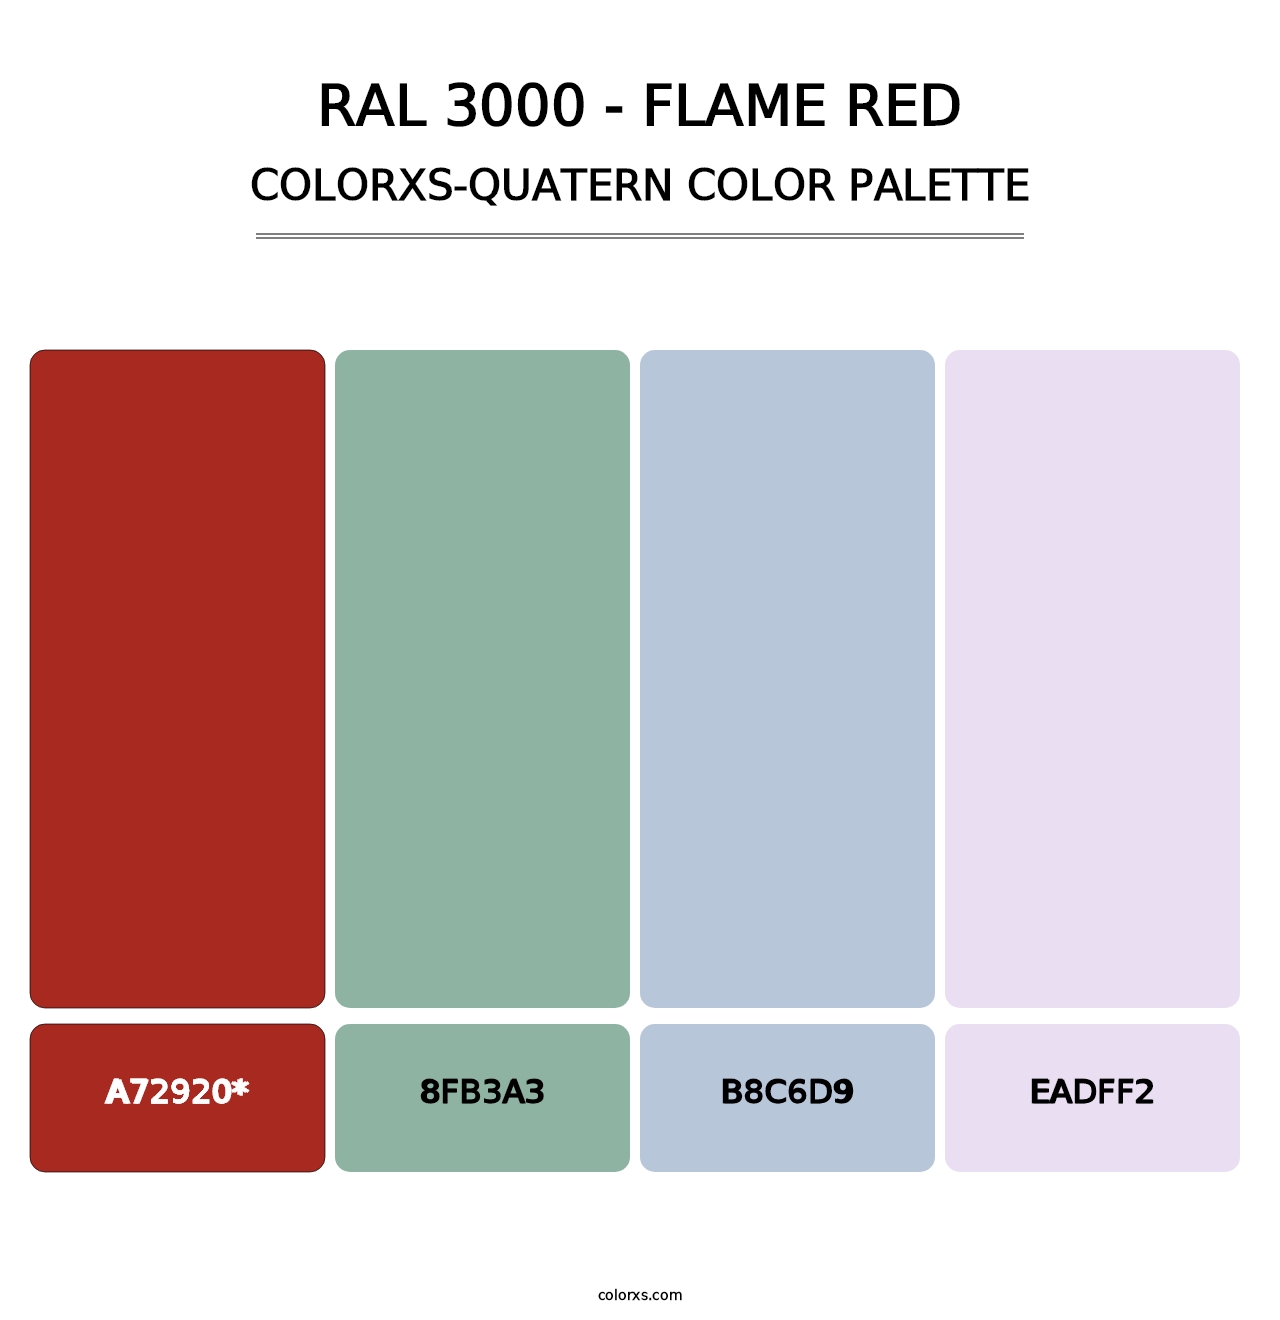 RAL 3000 - Flame Red - Colorxs Quatern Palette